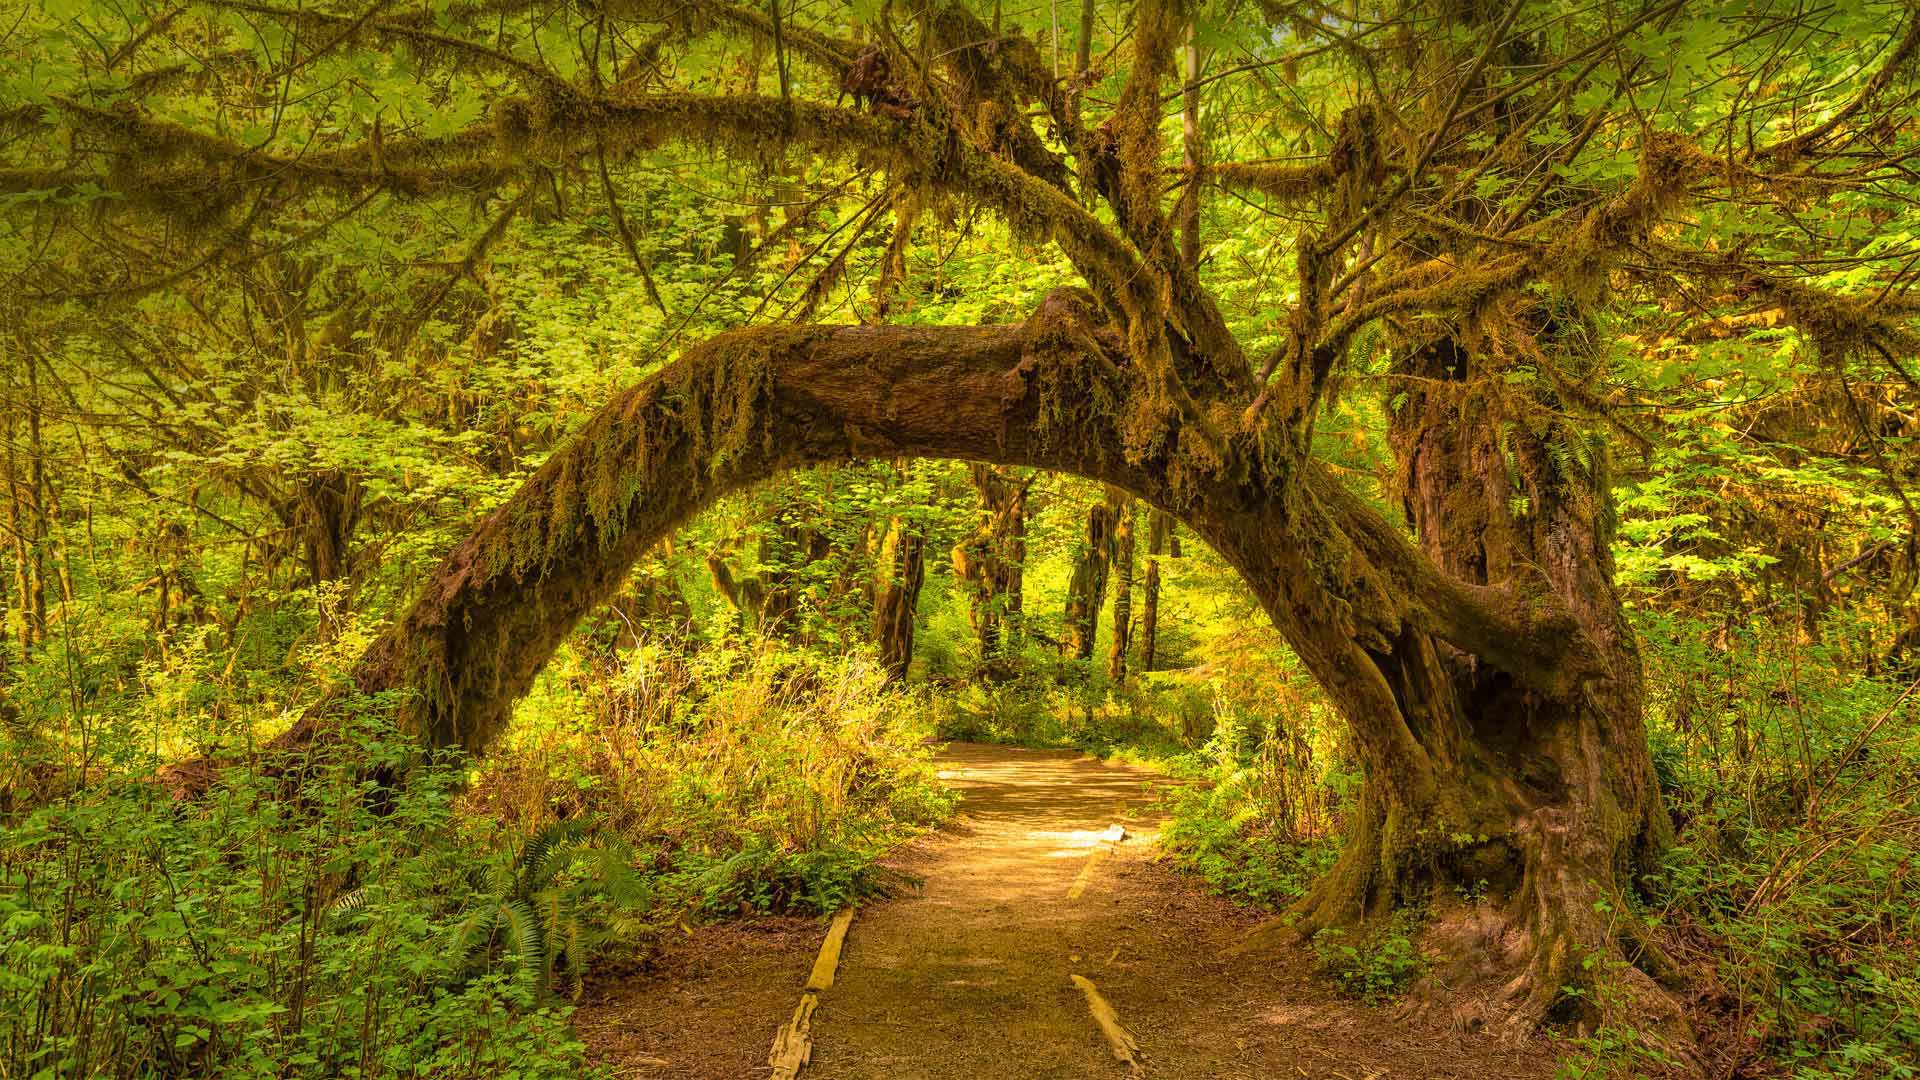 The Hoh Rainforest in Olympic National Park, Washington state - Jorge Romano/Offset by Shutterstock)